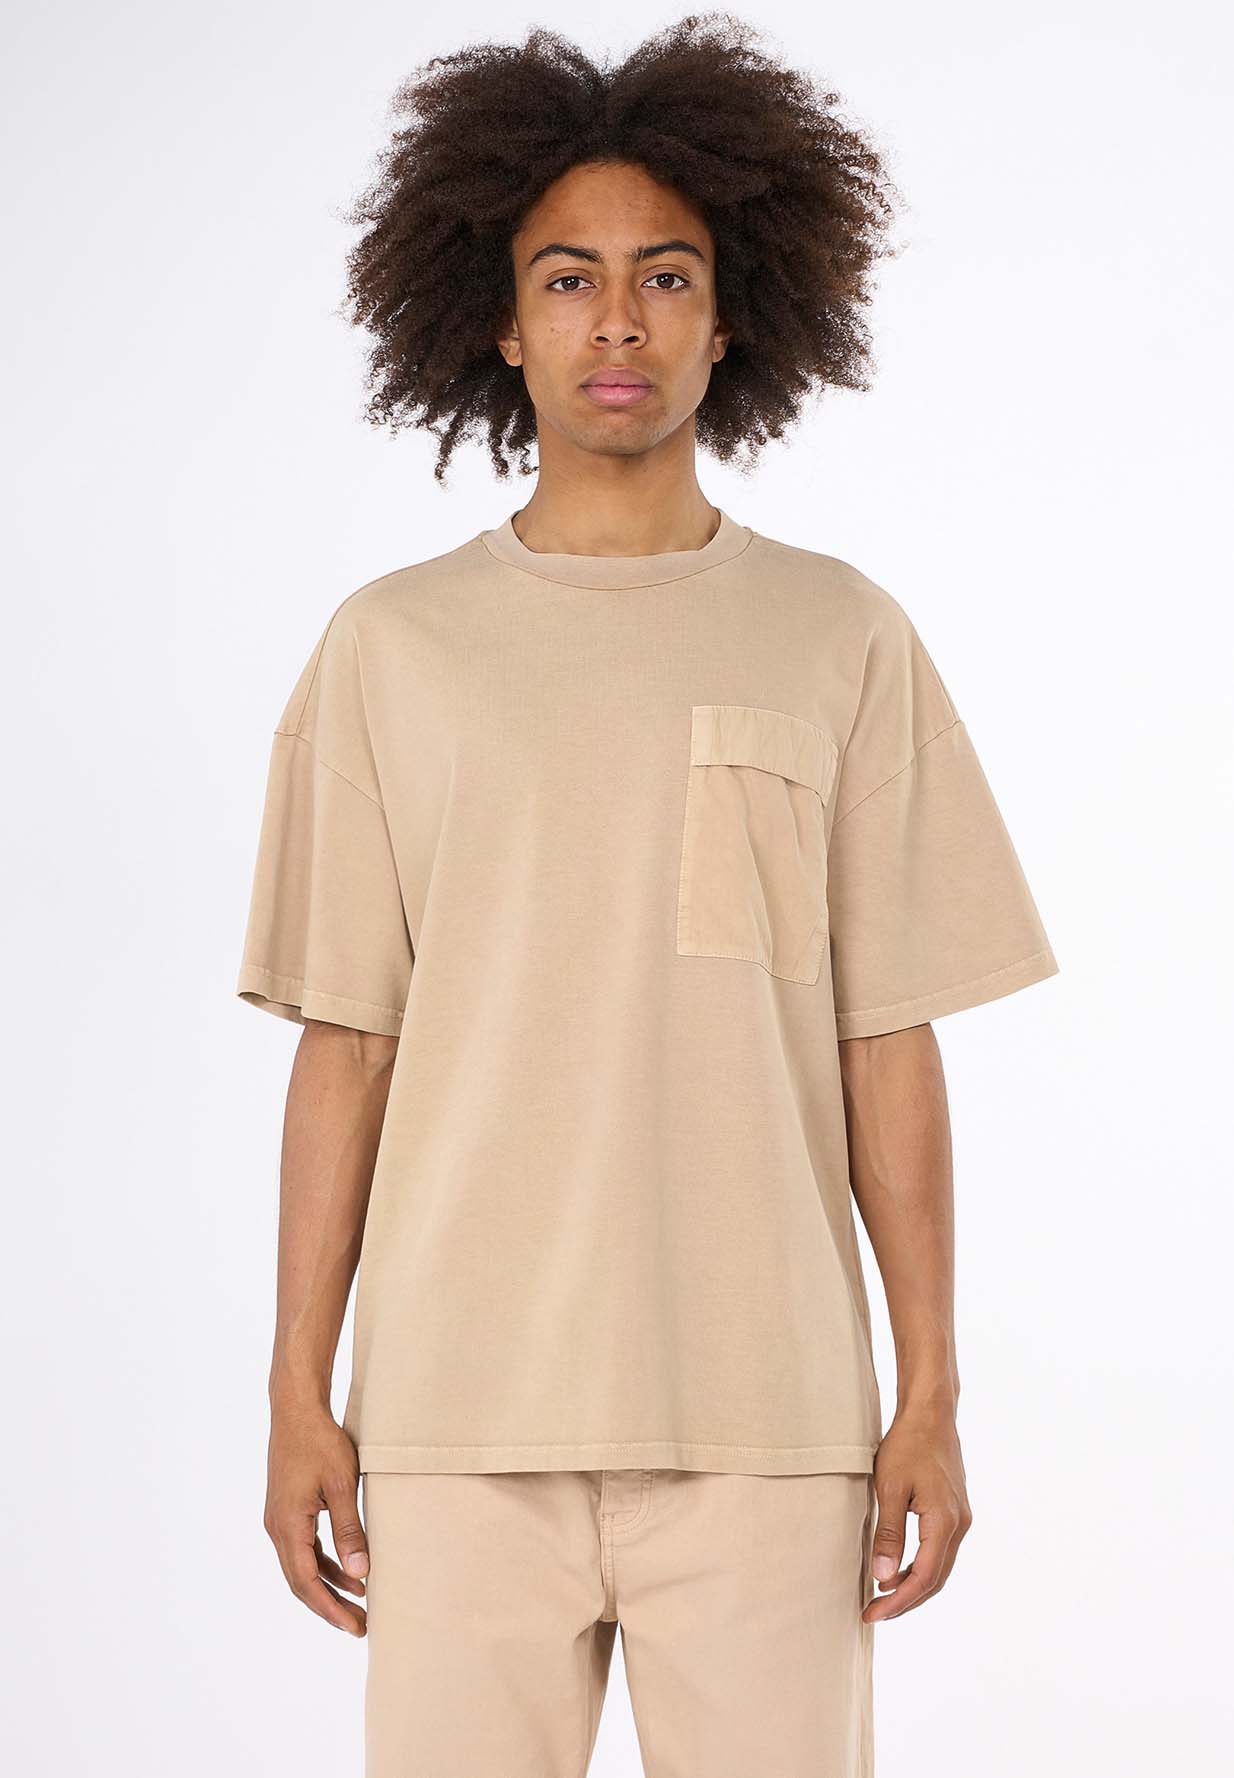 KNOWLEDGECOTTON APPAREL Nuance By Nature™ Loose T-Shirt safari XL